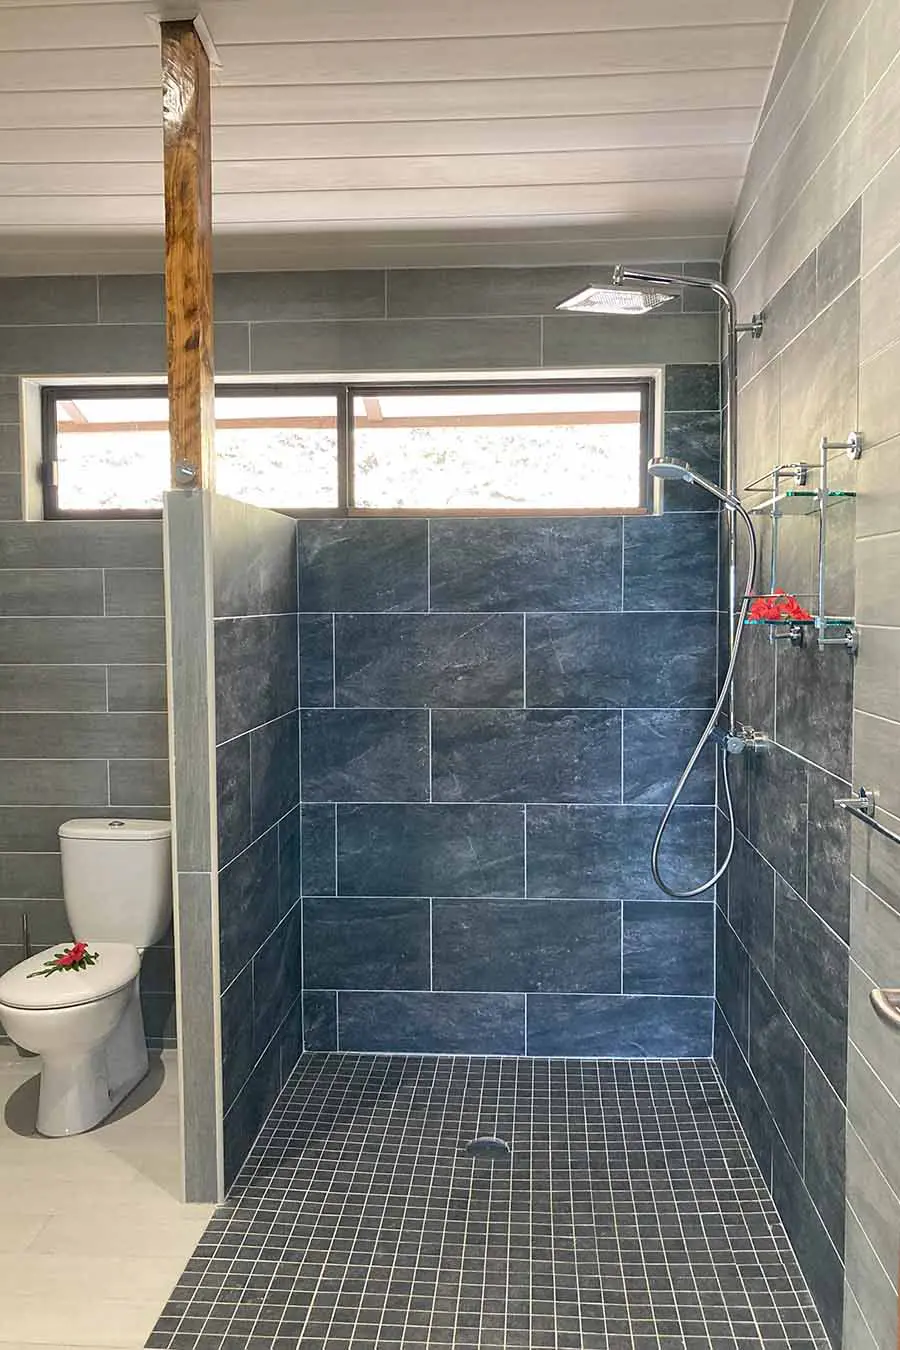 Shower with toilets in our vacation home in Bora Bora